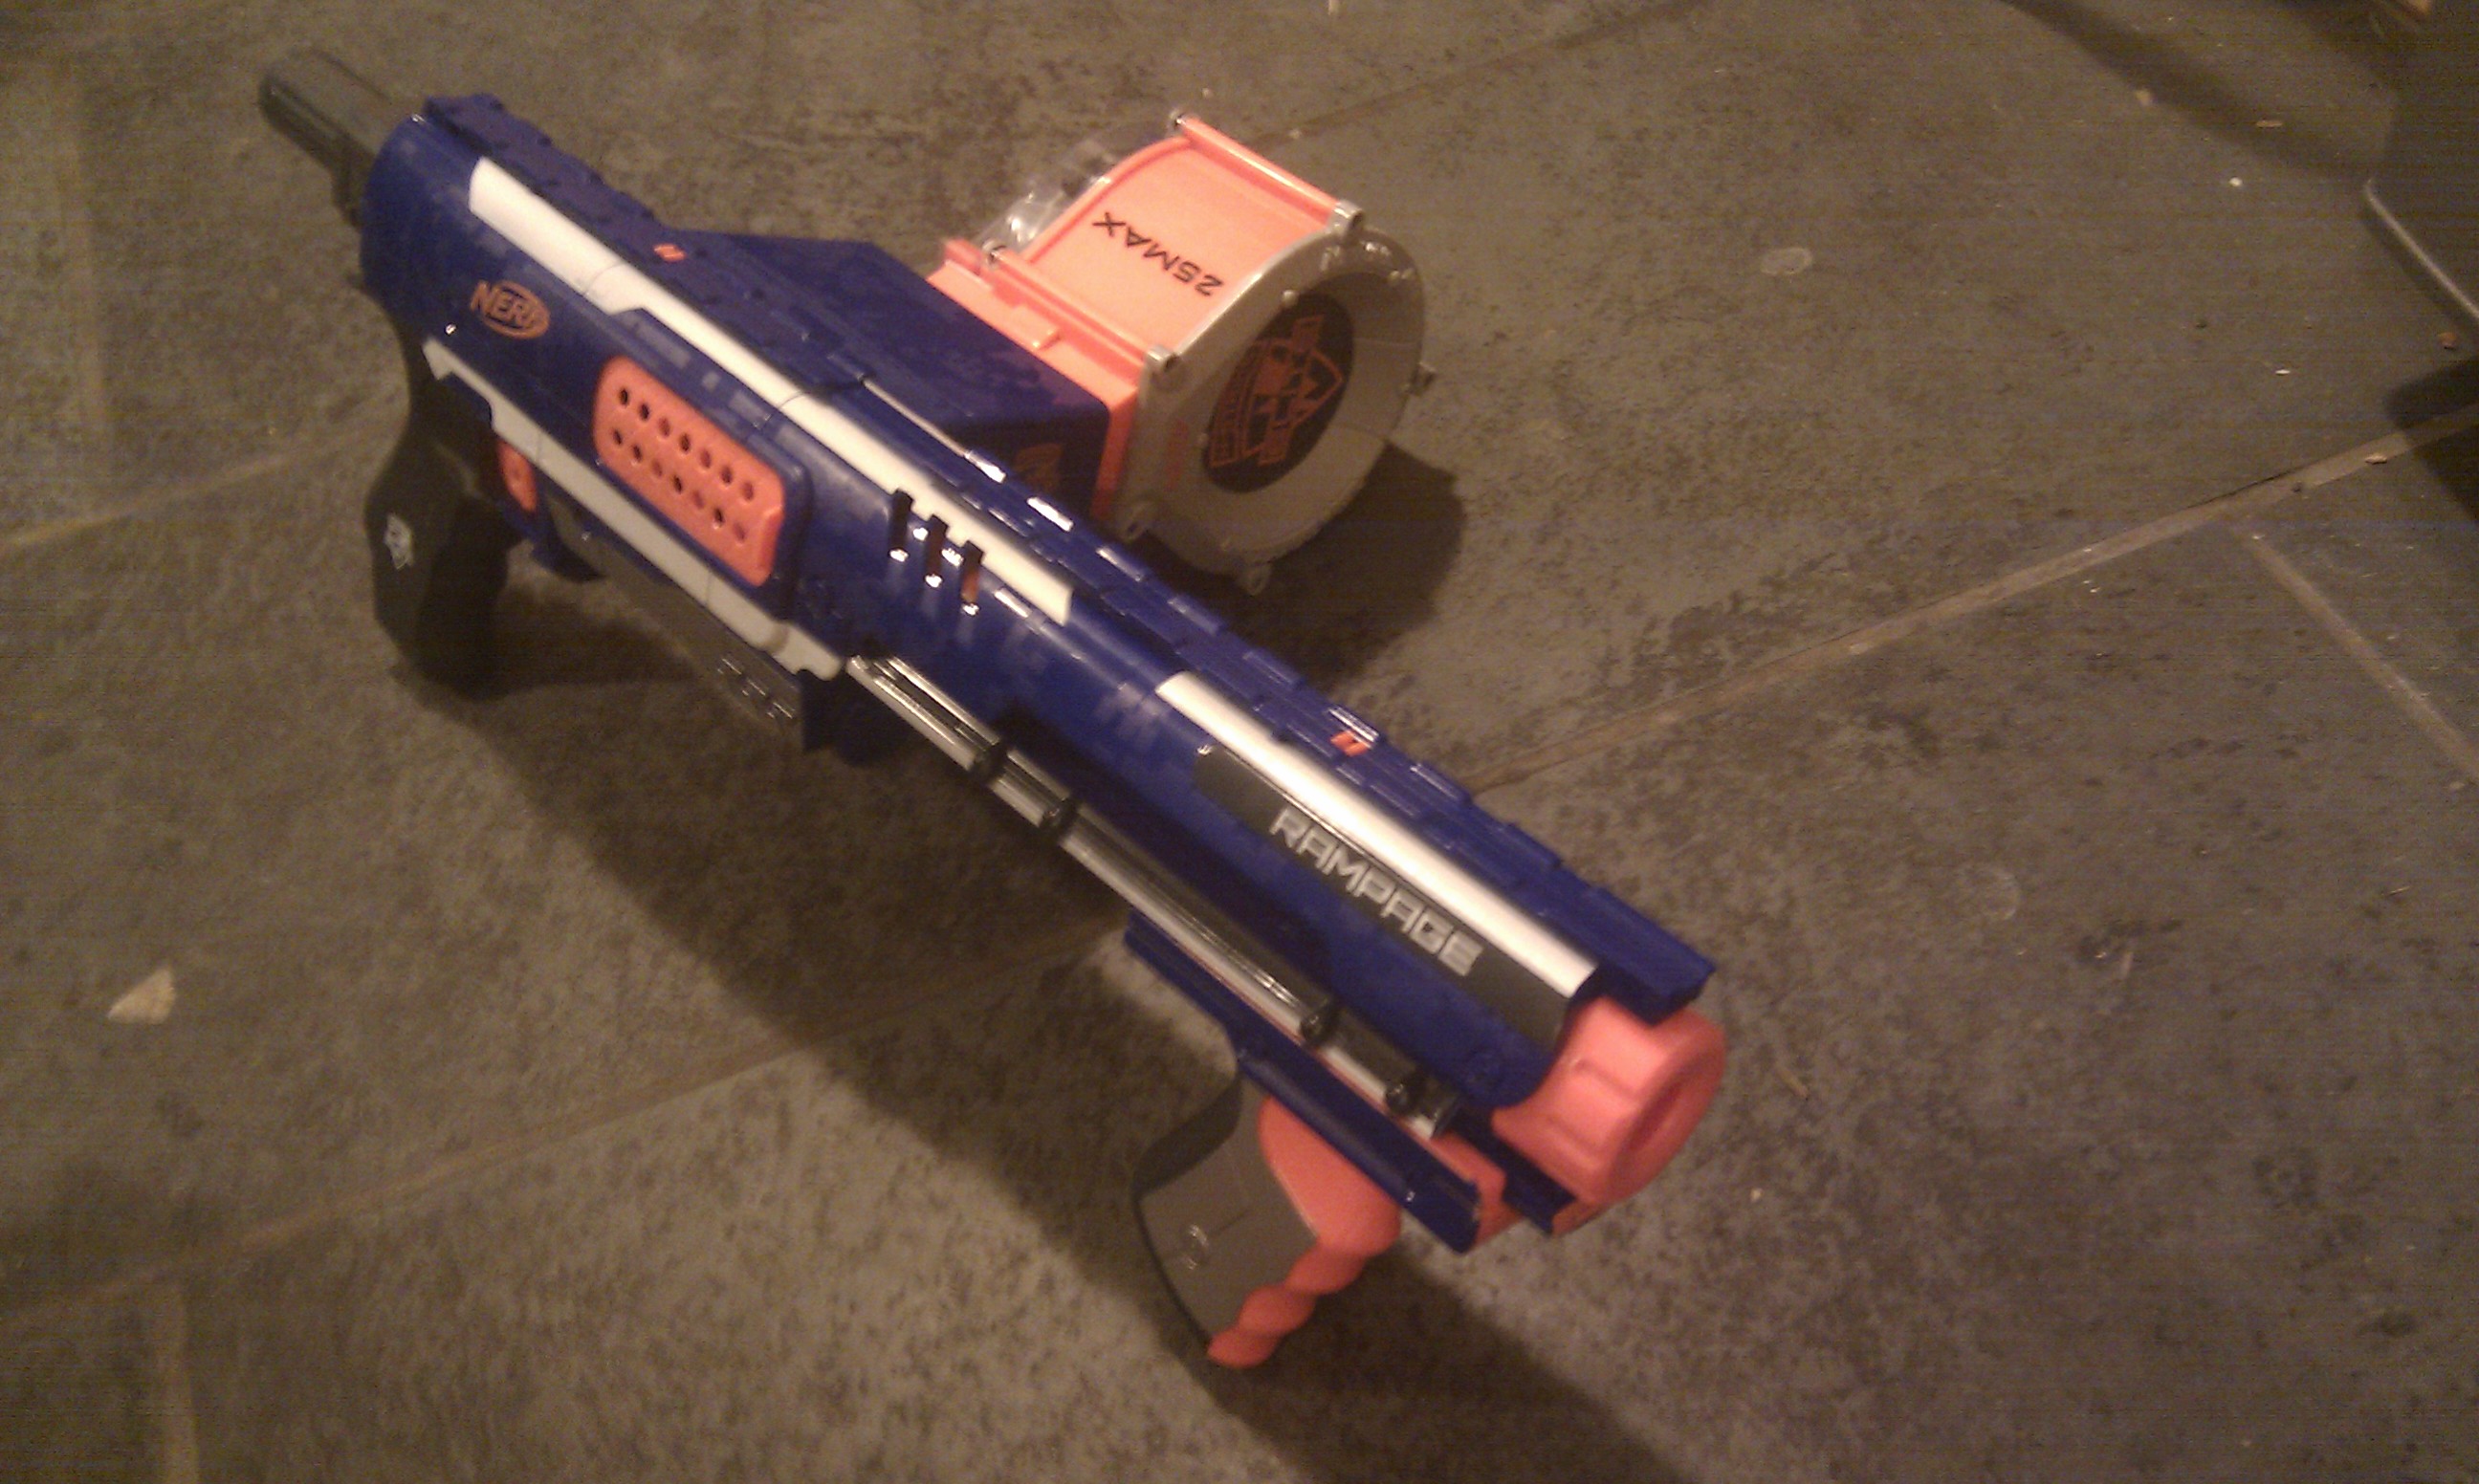 A picture of a Nerf gun